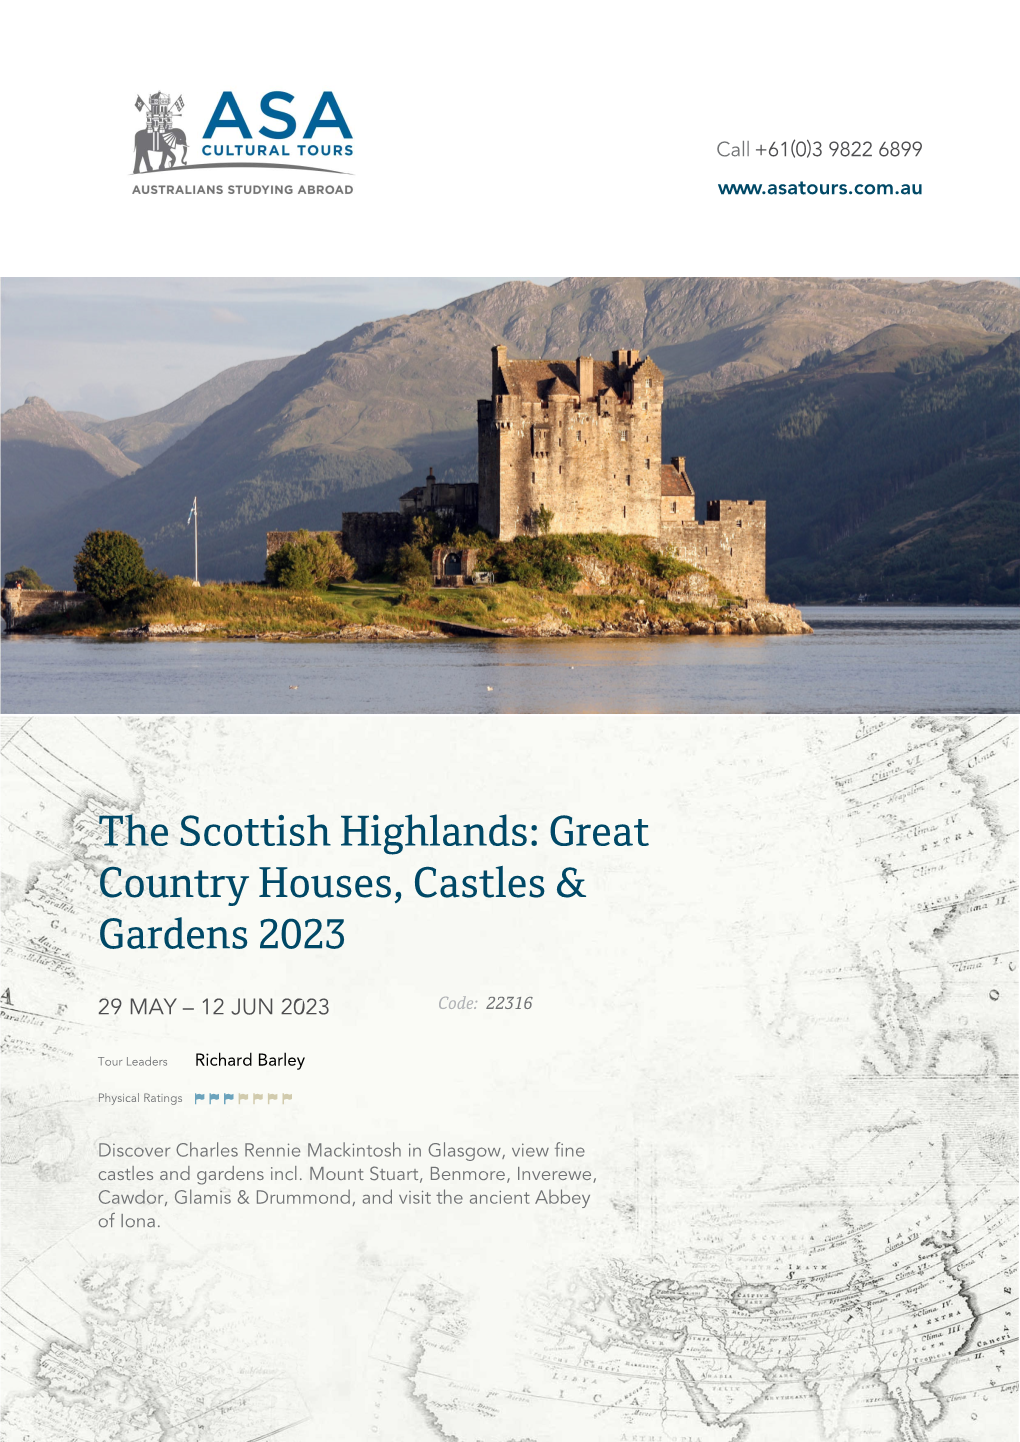 The Scottish Highlands: Great Country Houses, Castles & Gardens 2023